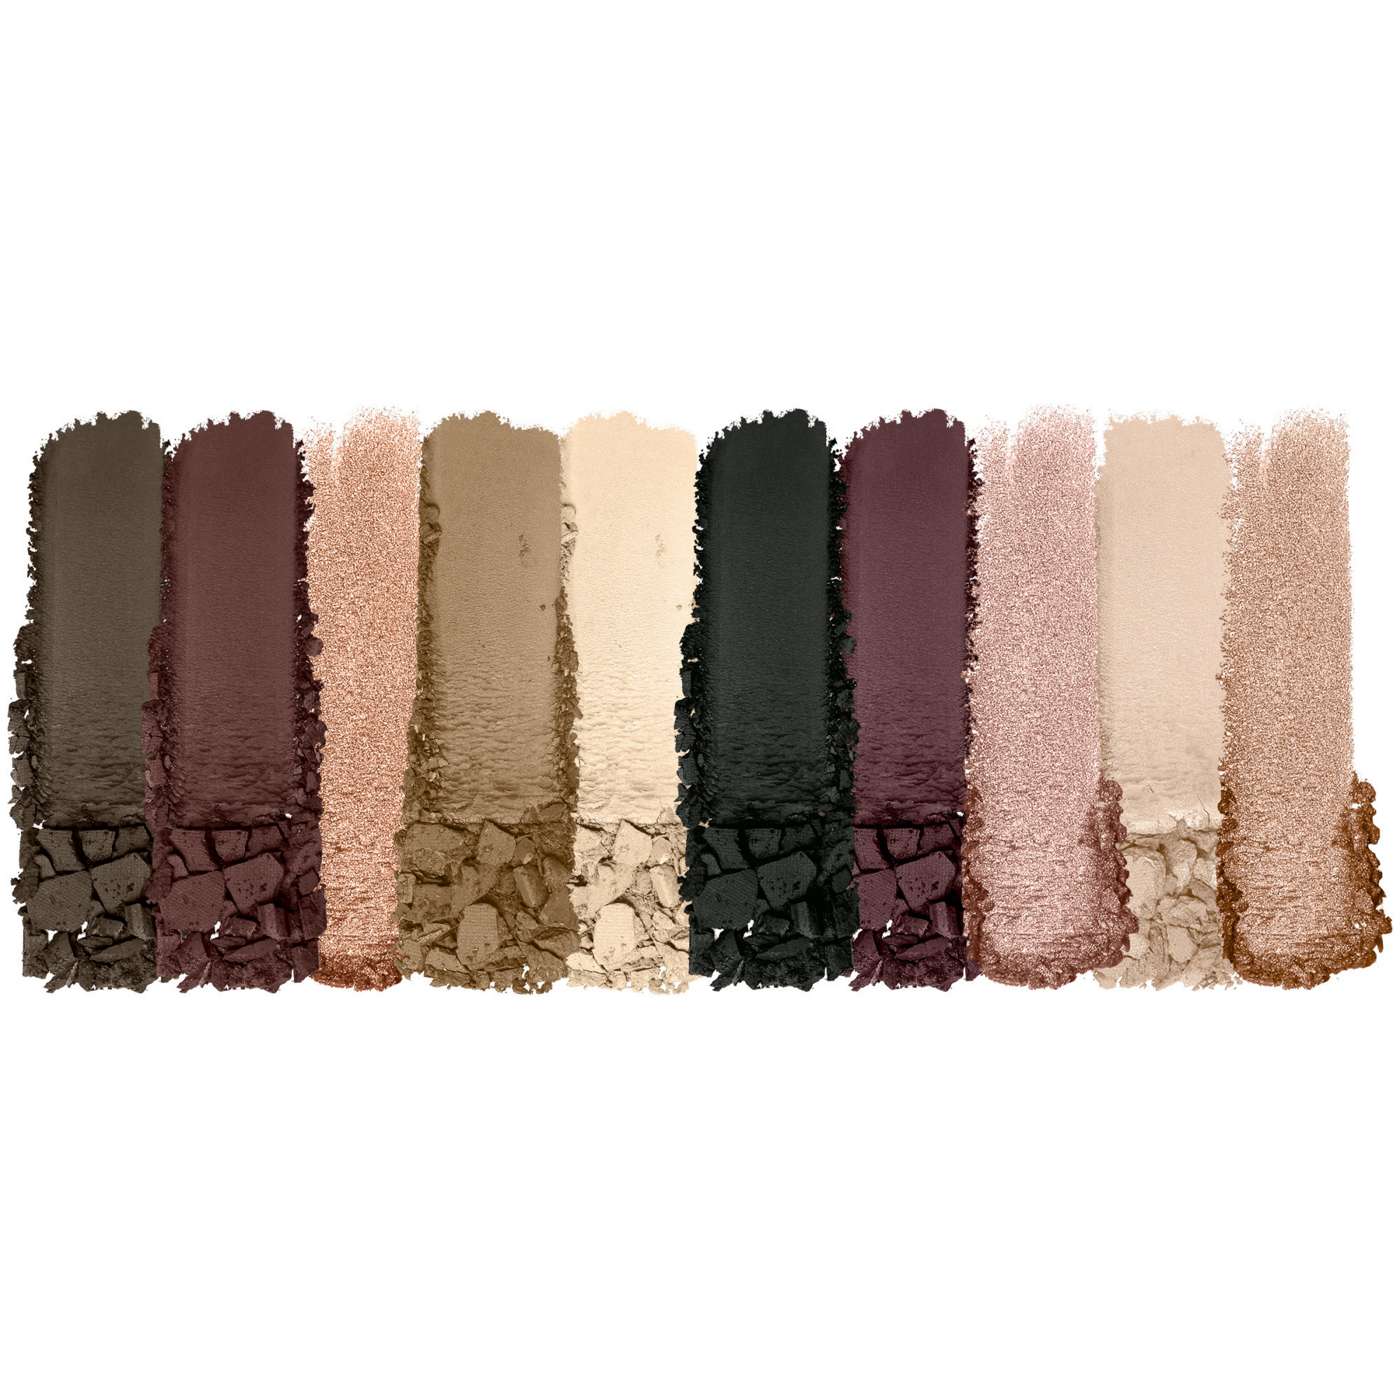 Wet n Wild Color Icon Eyeshadow Palette Nude; image 2 of 2